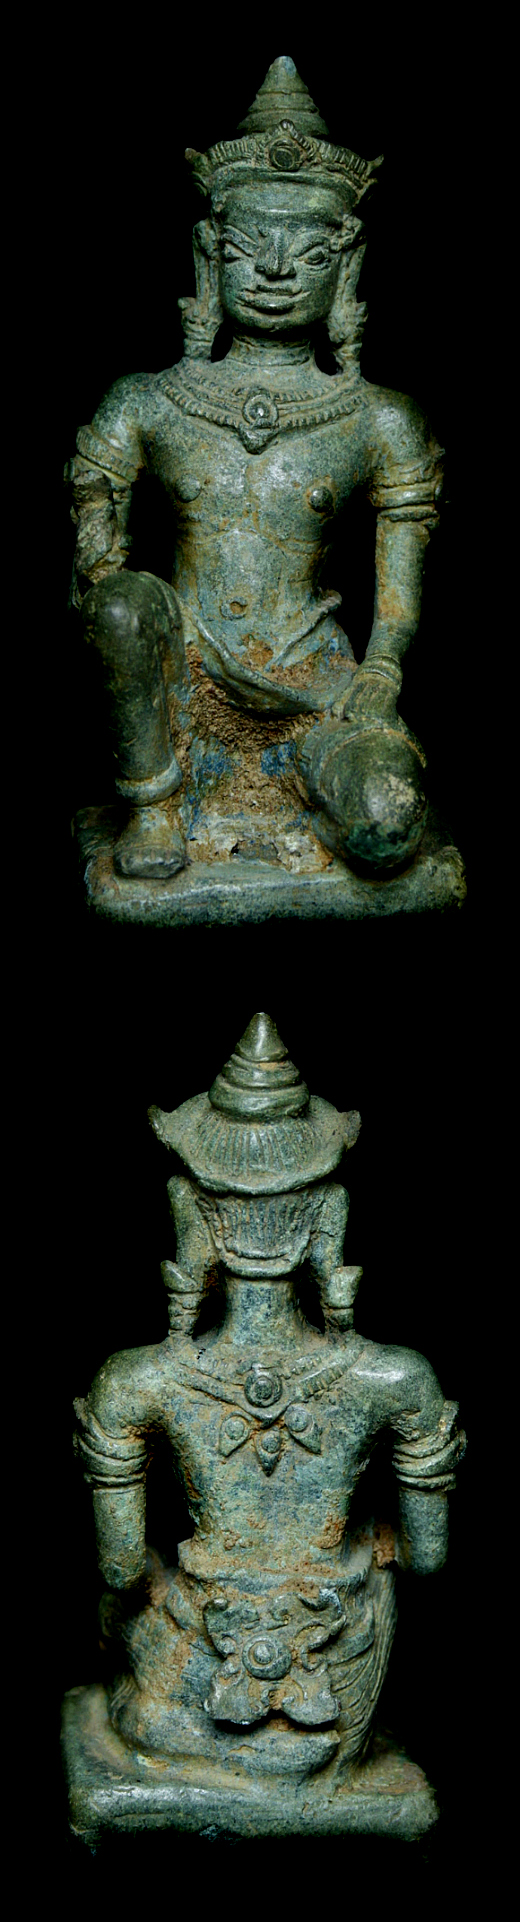 Extremely Rare 12C Khmer Siva Sculpture #AL1091